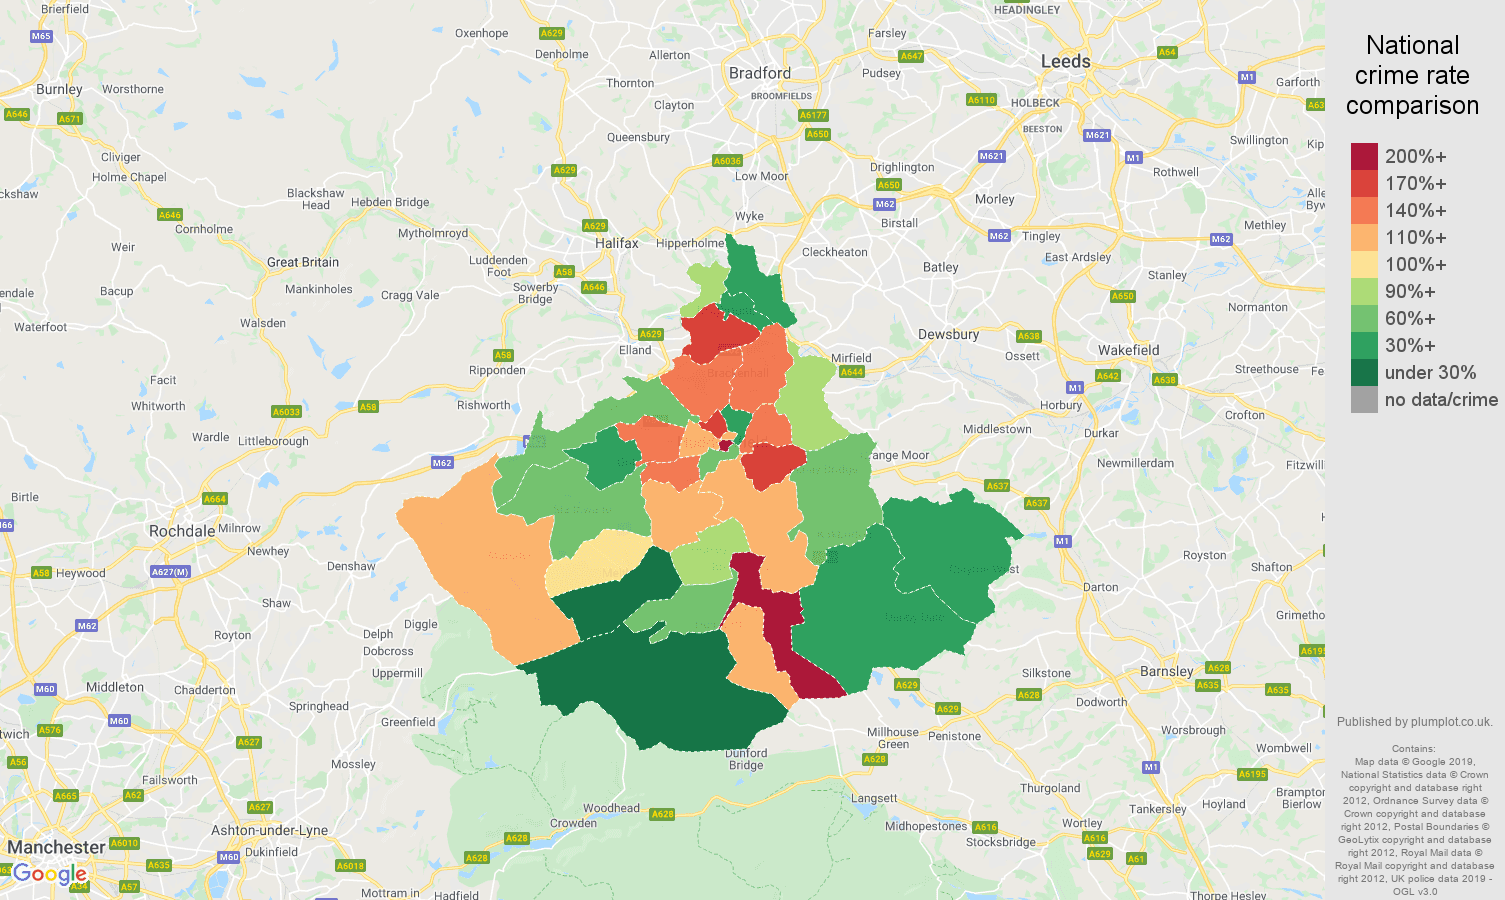 Huddersfield other crime rate comparison map